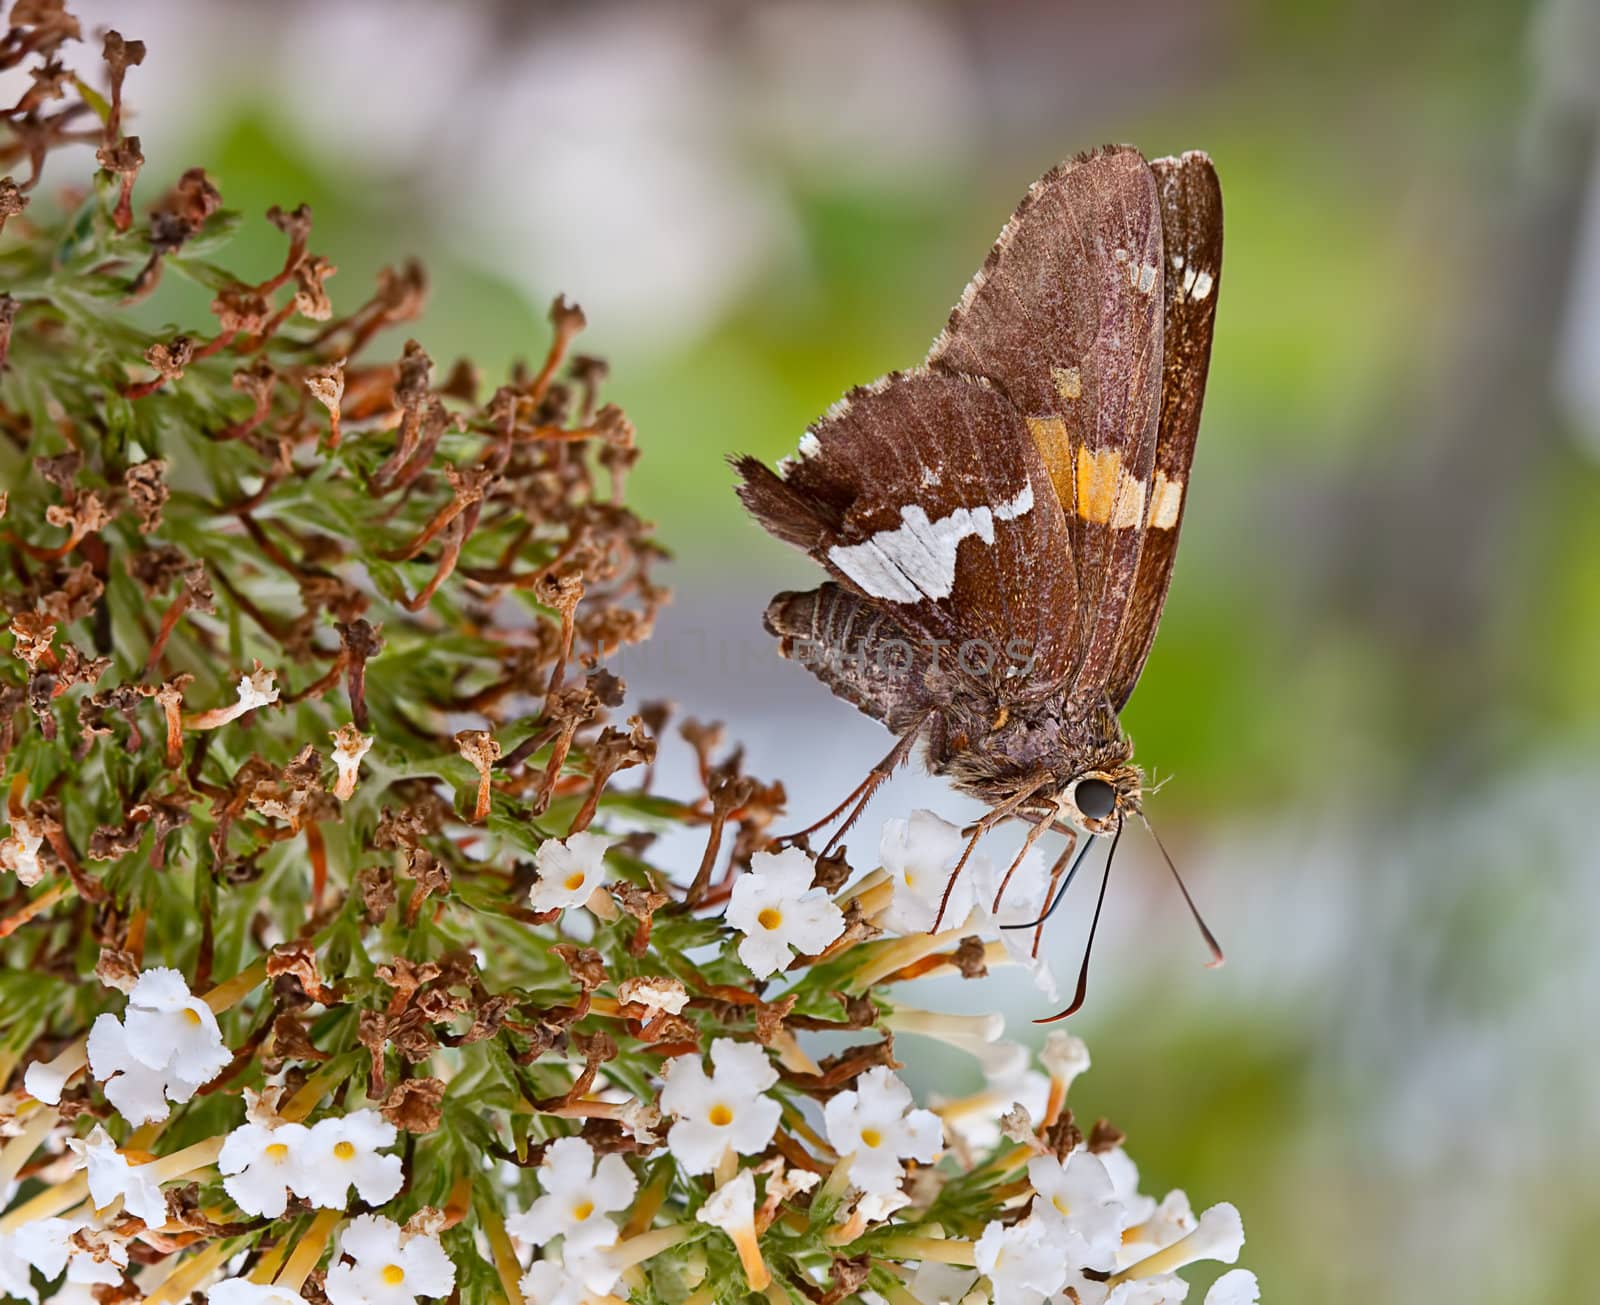 A silver-spotted skipper butterfly on a flower in a garden. The butterfly is sucking nectar from a flower.